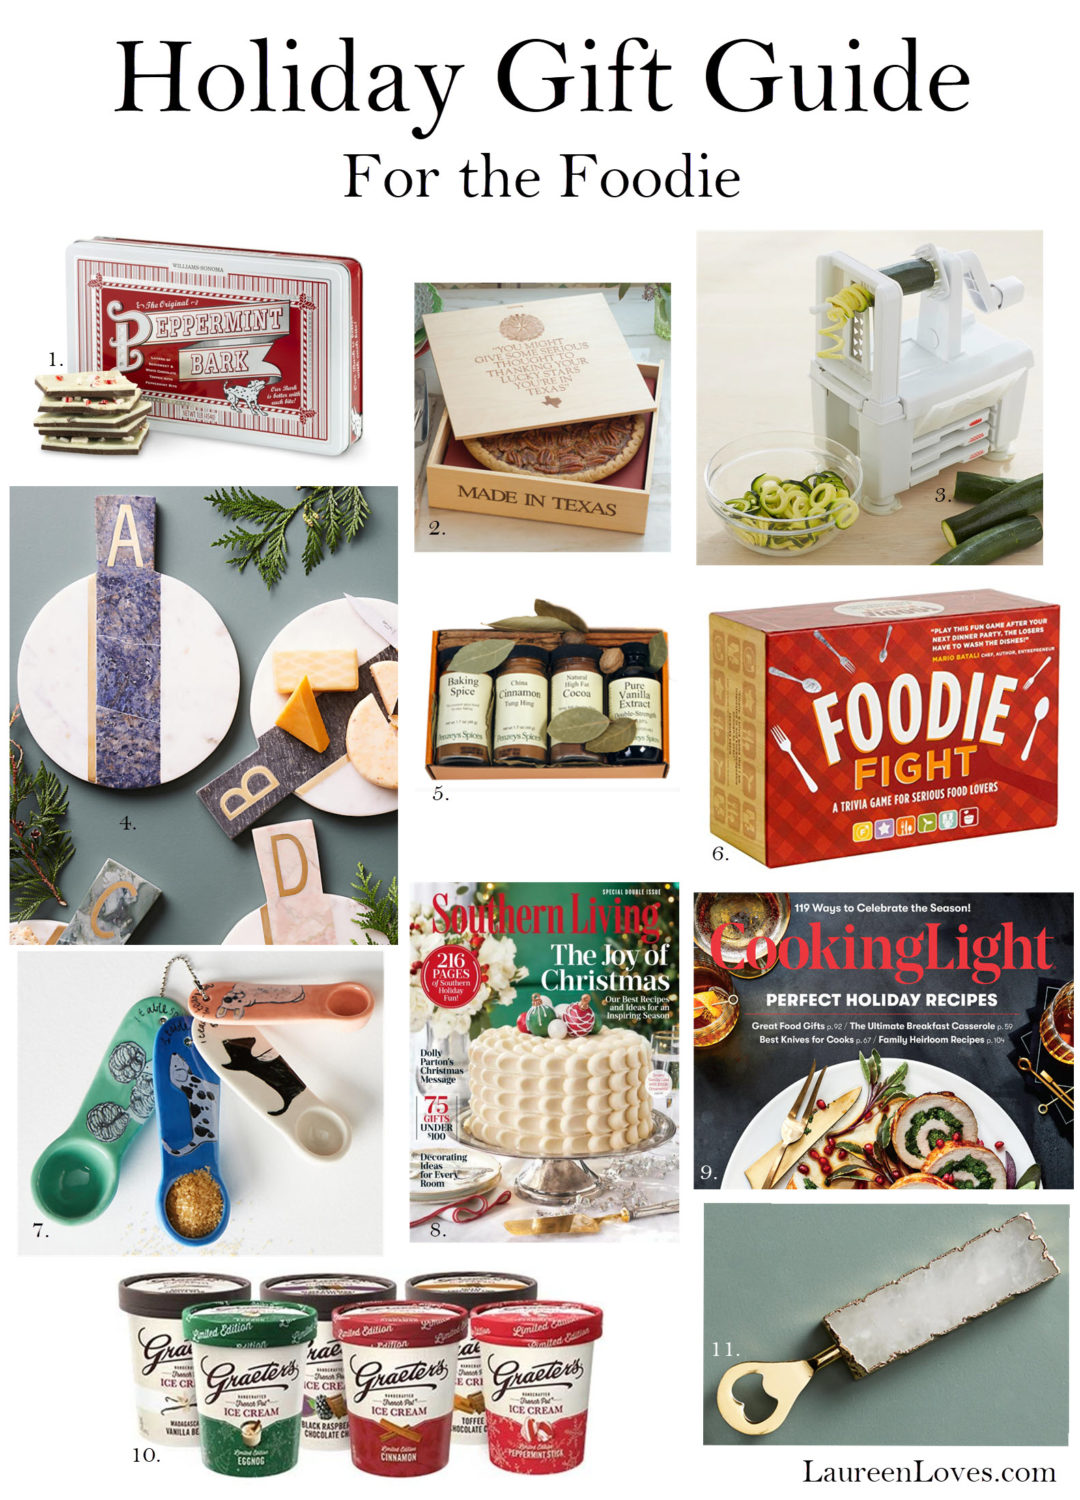 foodie gift picks, gifts for food lovers